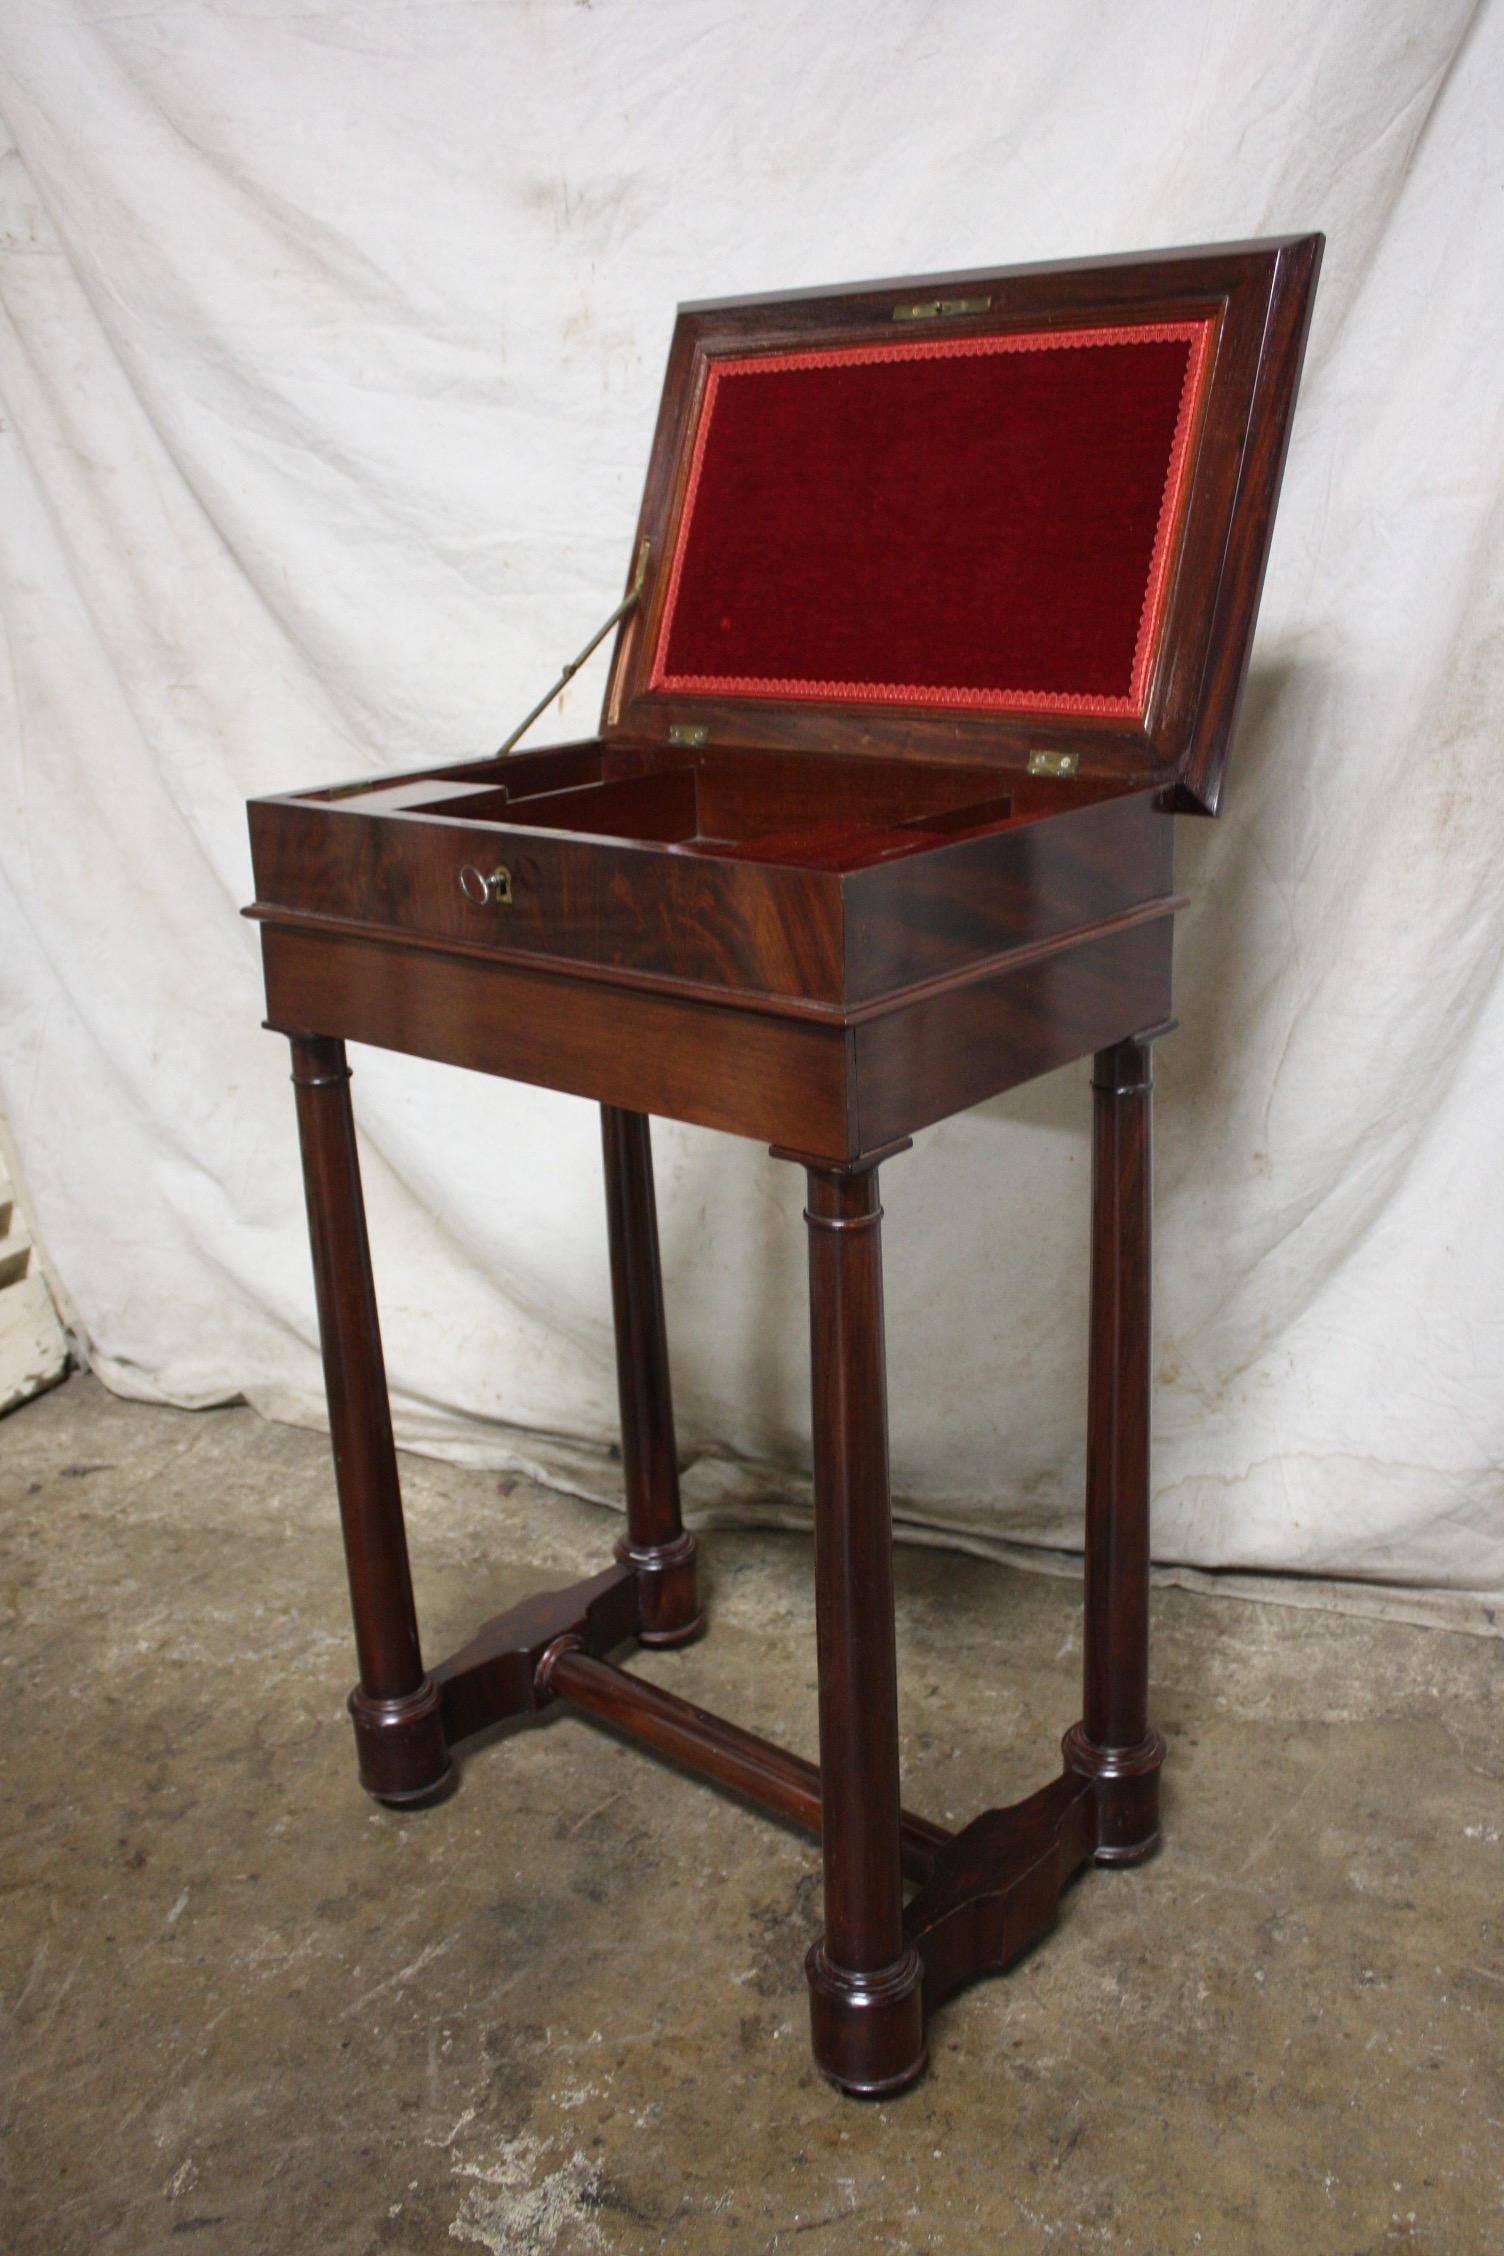 Late 19th century Empire style jewelry side table.